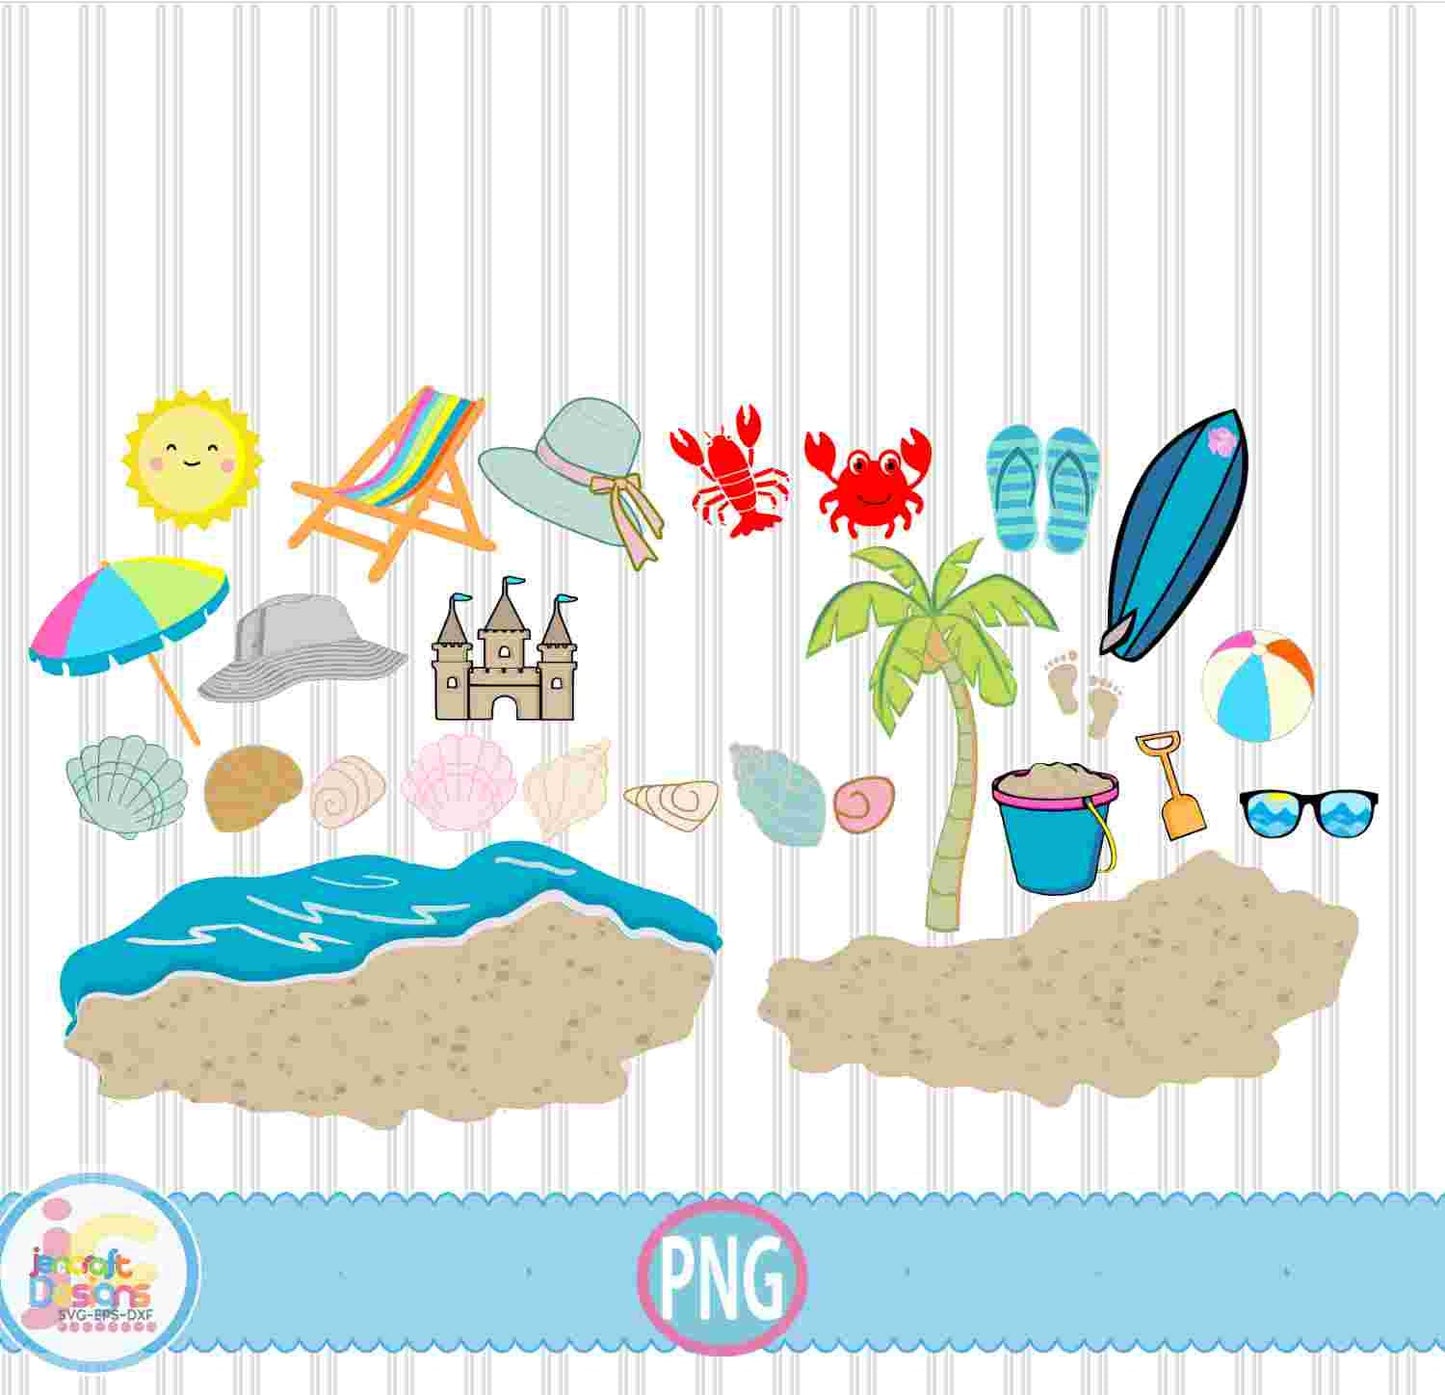 Beach Sublimation Doodle Letters Alphabet Png Print File for Sublimation or Printing - JenCraft Designs